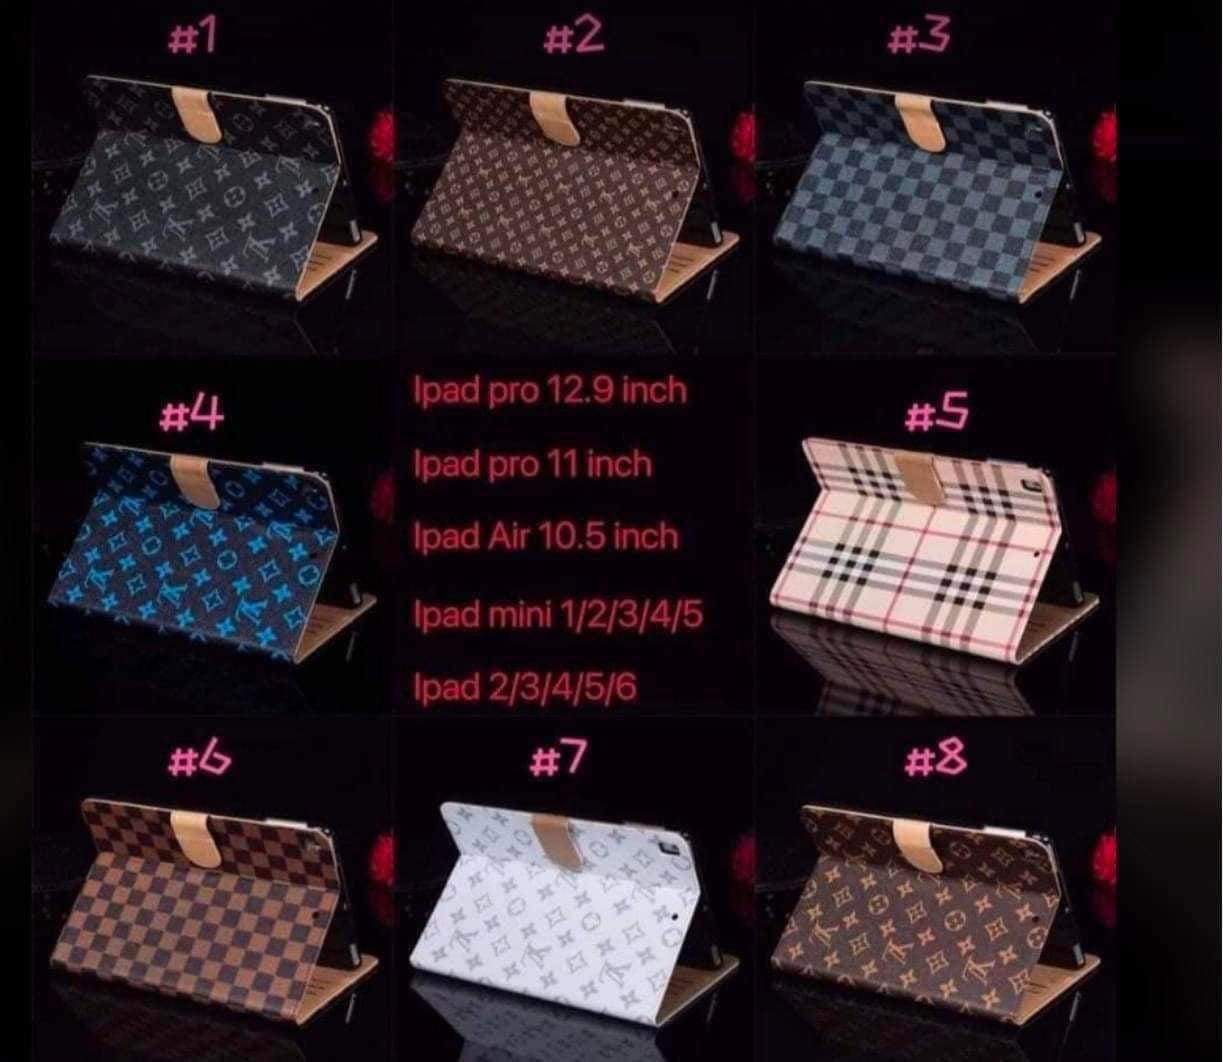 DUPE LV IPAD CASES